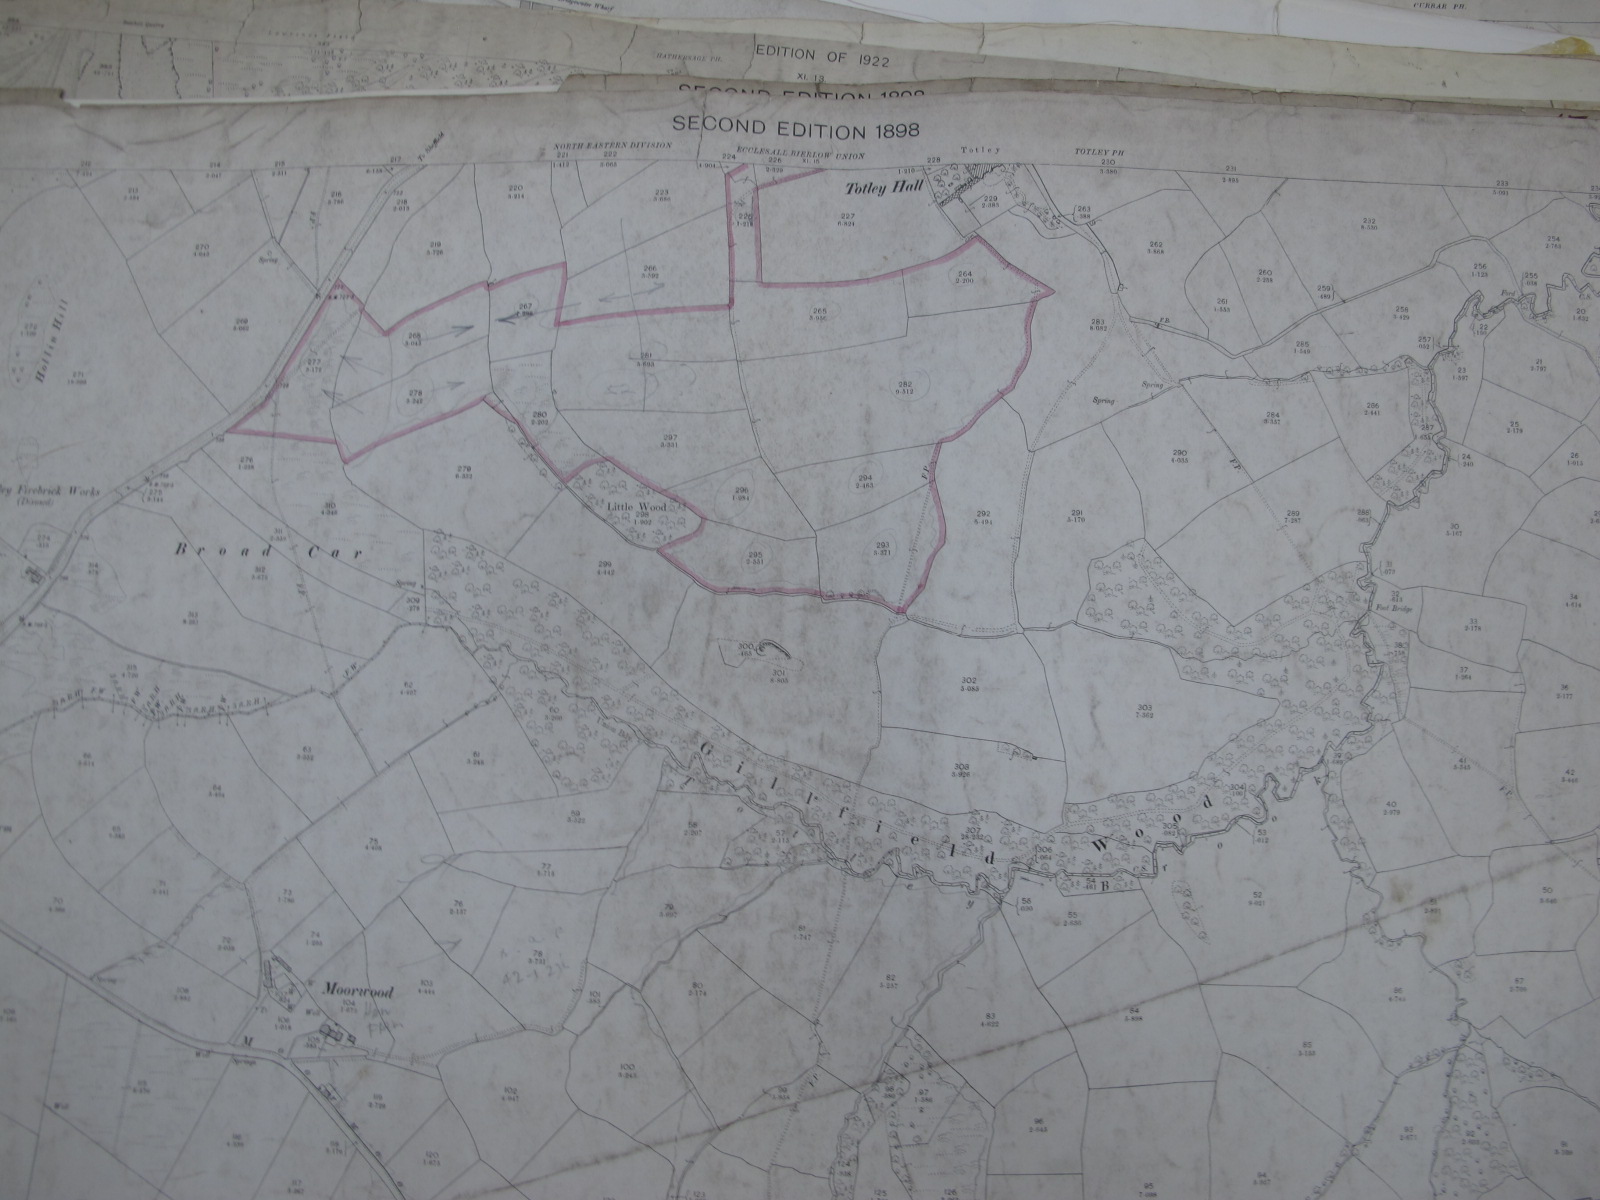 Derbyshire Maps, to include Eckington, Renishaw, Coal Aston, Scarsdale, Dronfield, Dronfield - Image 8 of 11